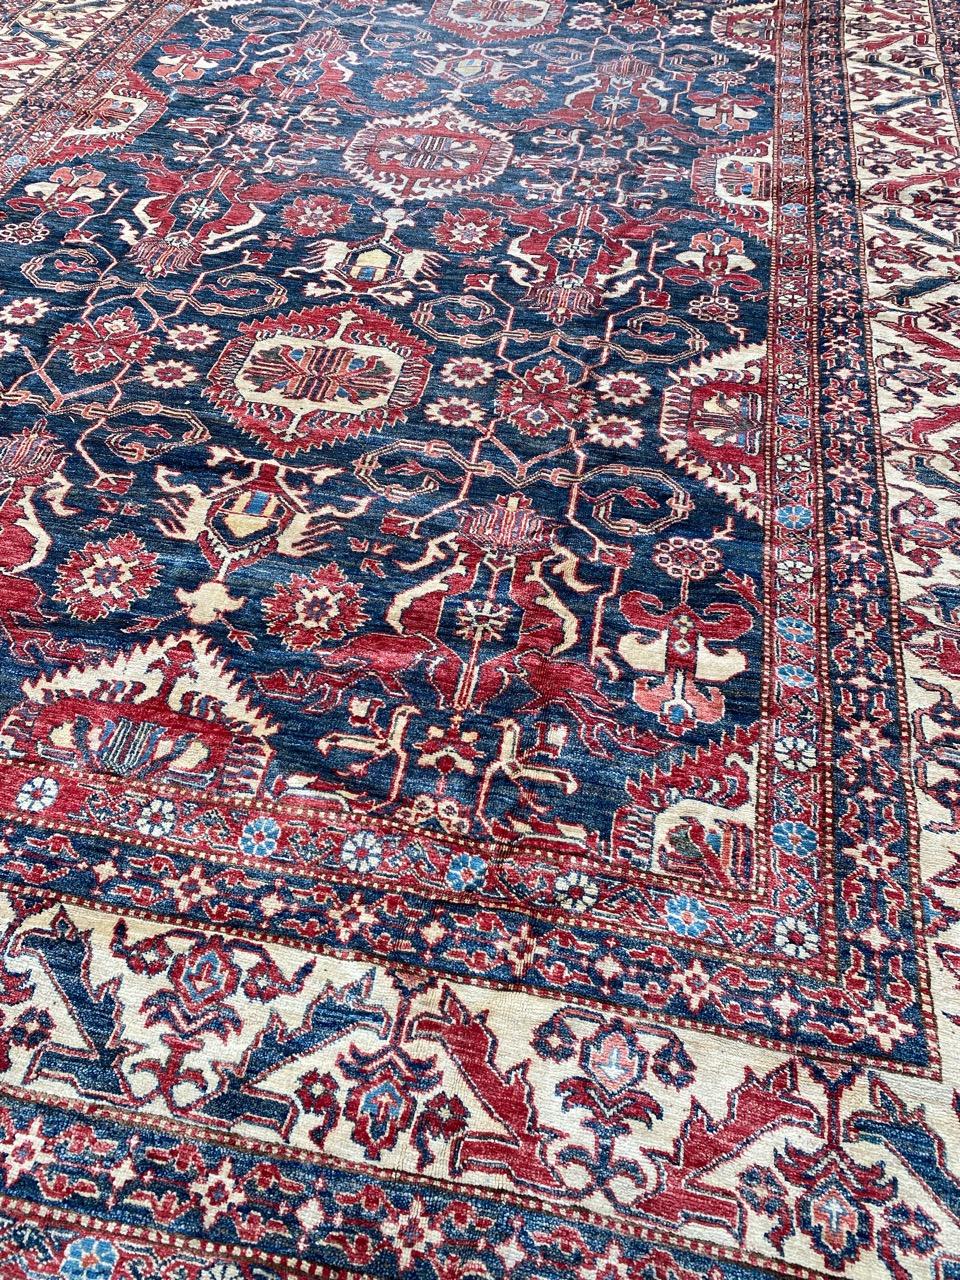 Very beautiful late 20th century Persian mahal design Chobi rug with beautiful decorative design and nice colors, entirely hand knotted with wool velvet on cotton foundation.

✨✨✨
